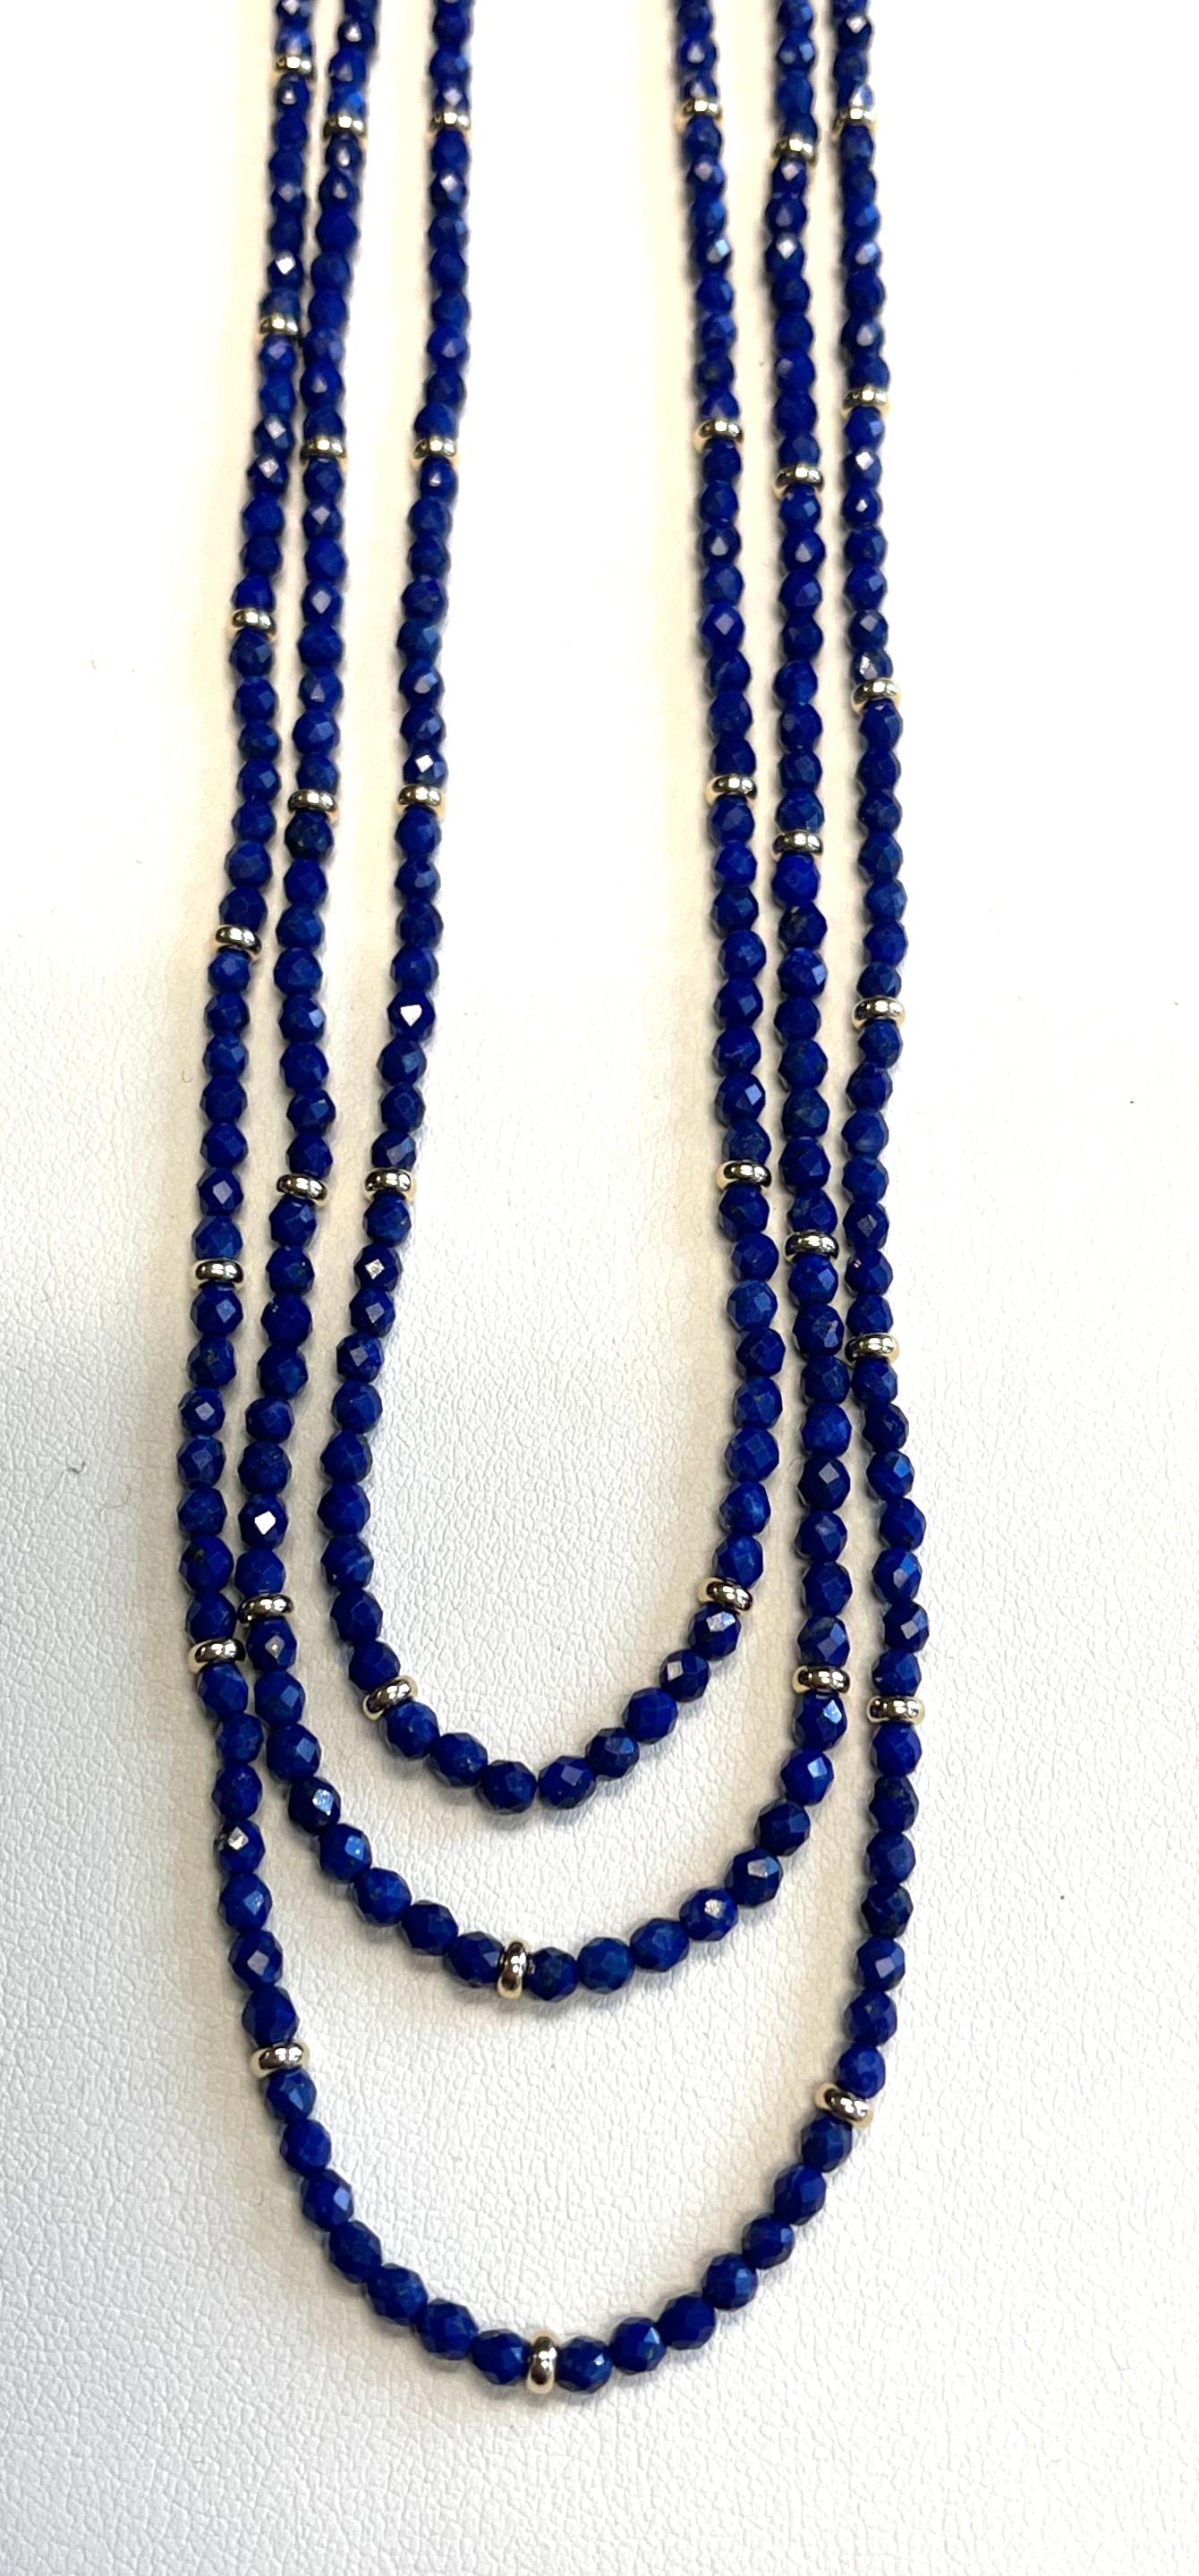 Faceted Lapis Bead Necklace with Yellow Gold Accents, 32 Inches For Sale 1